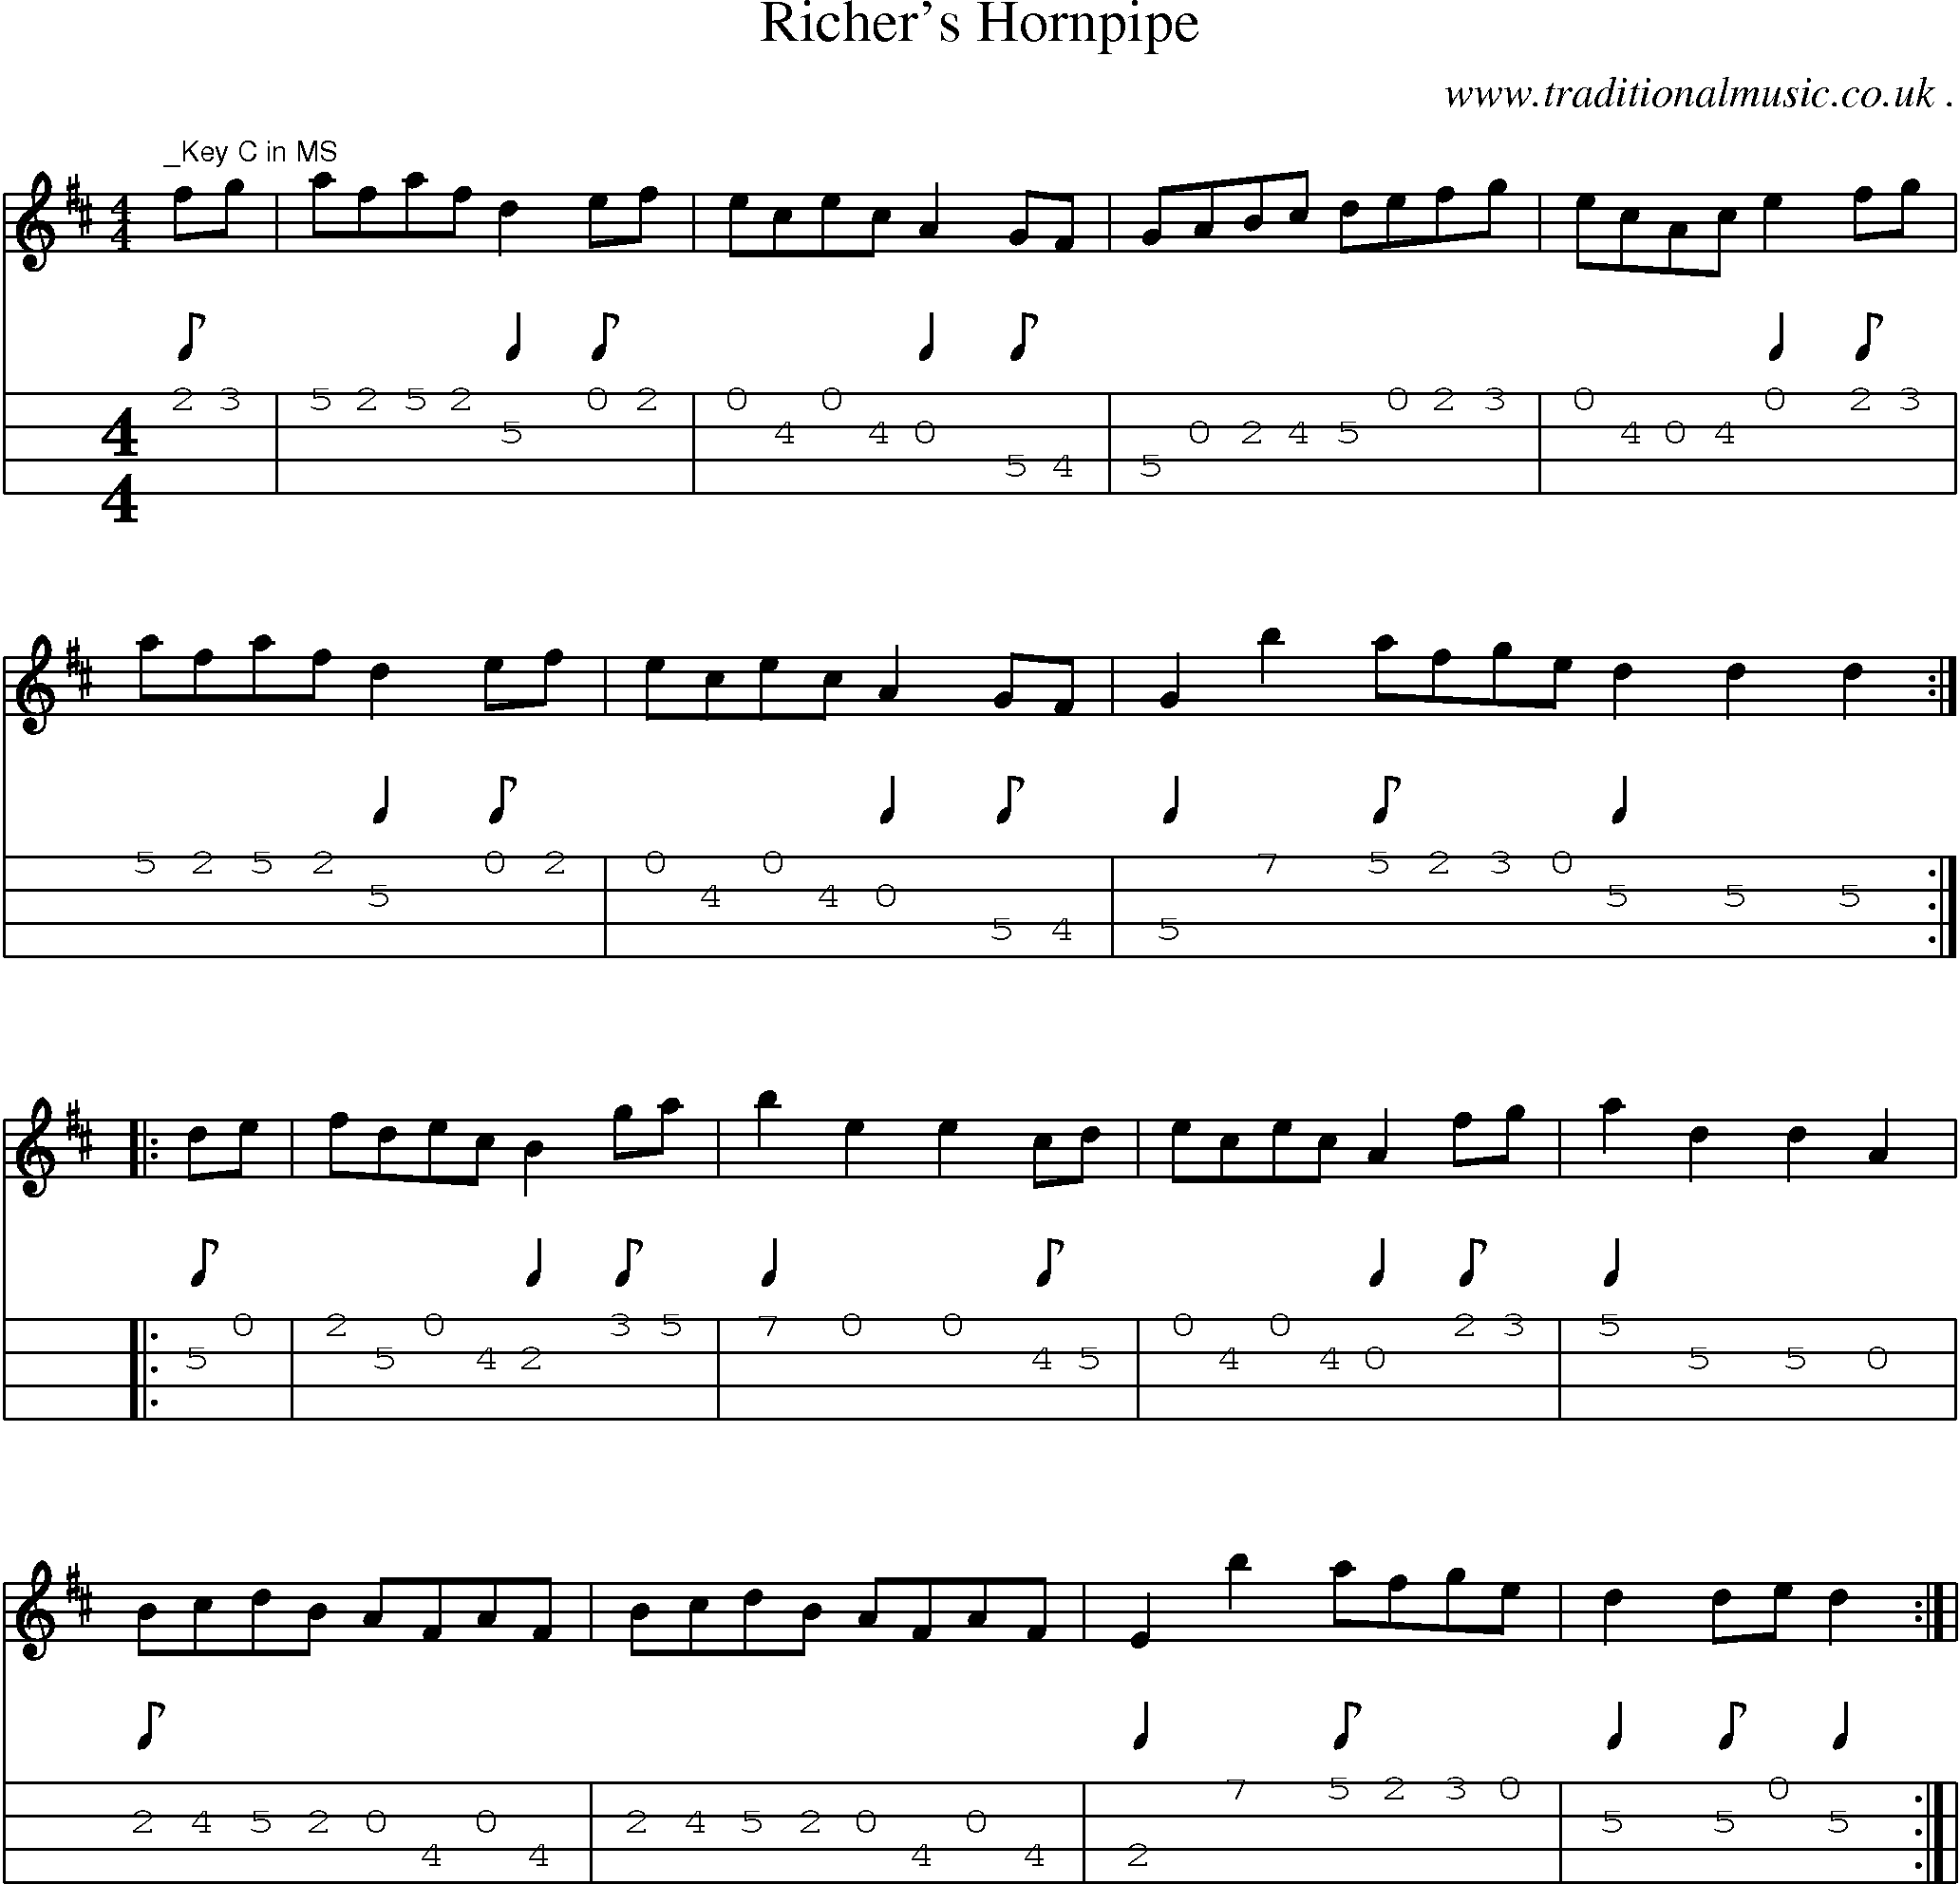 Sheet-Music and Mandolin Tabs for Richers Hornpipe